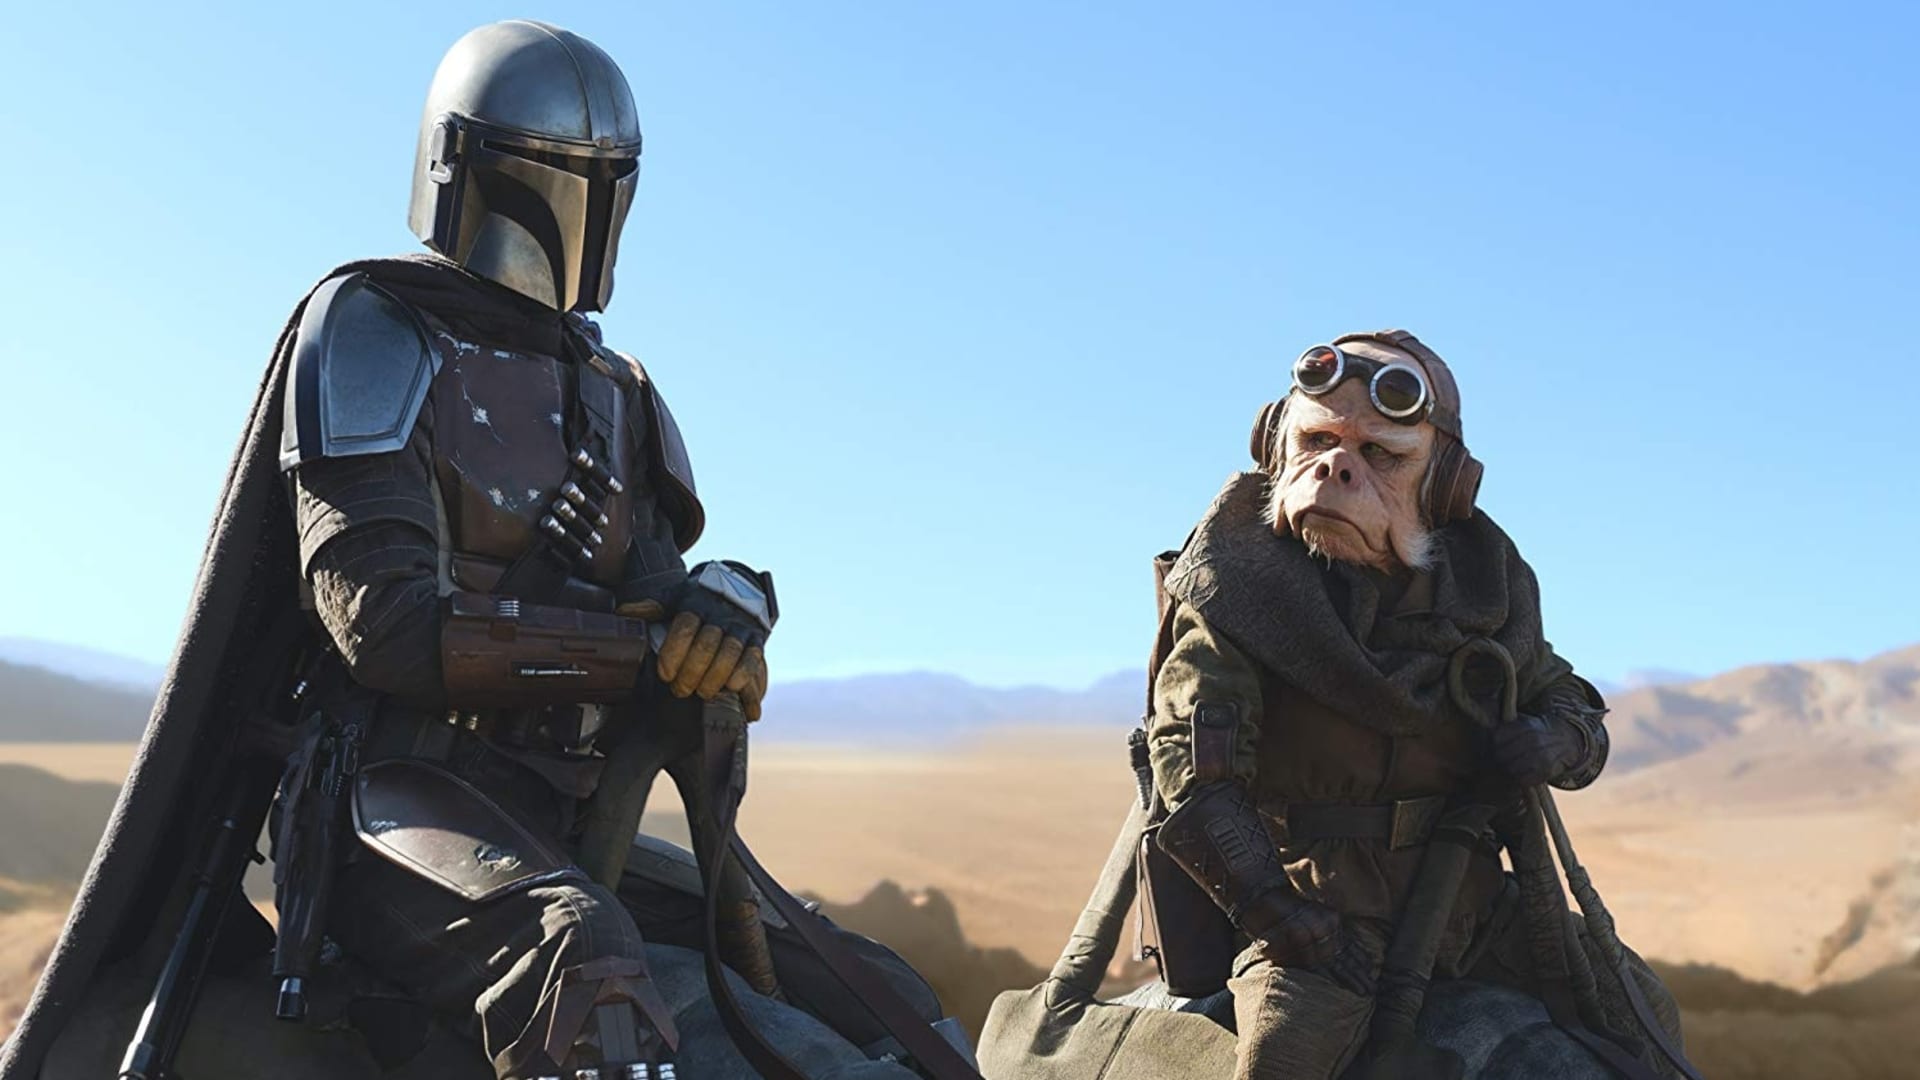 Why 'The Mandalorian' episodes are short and arrive on Disney+ once a week